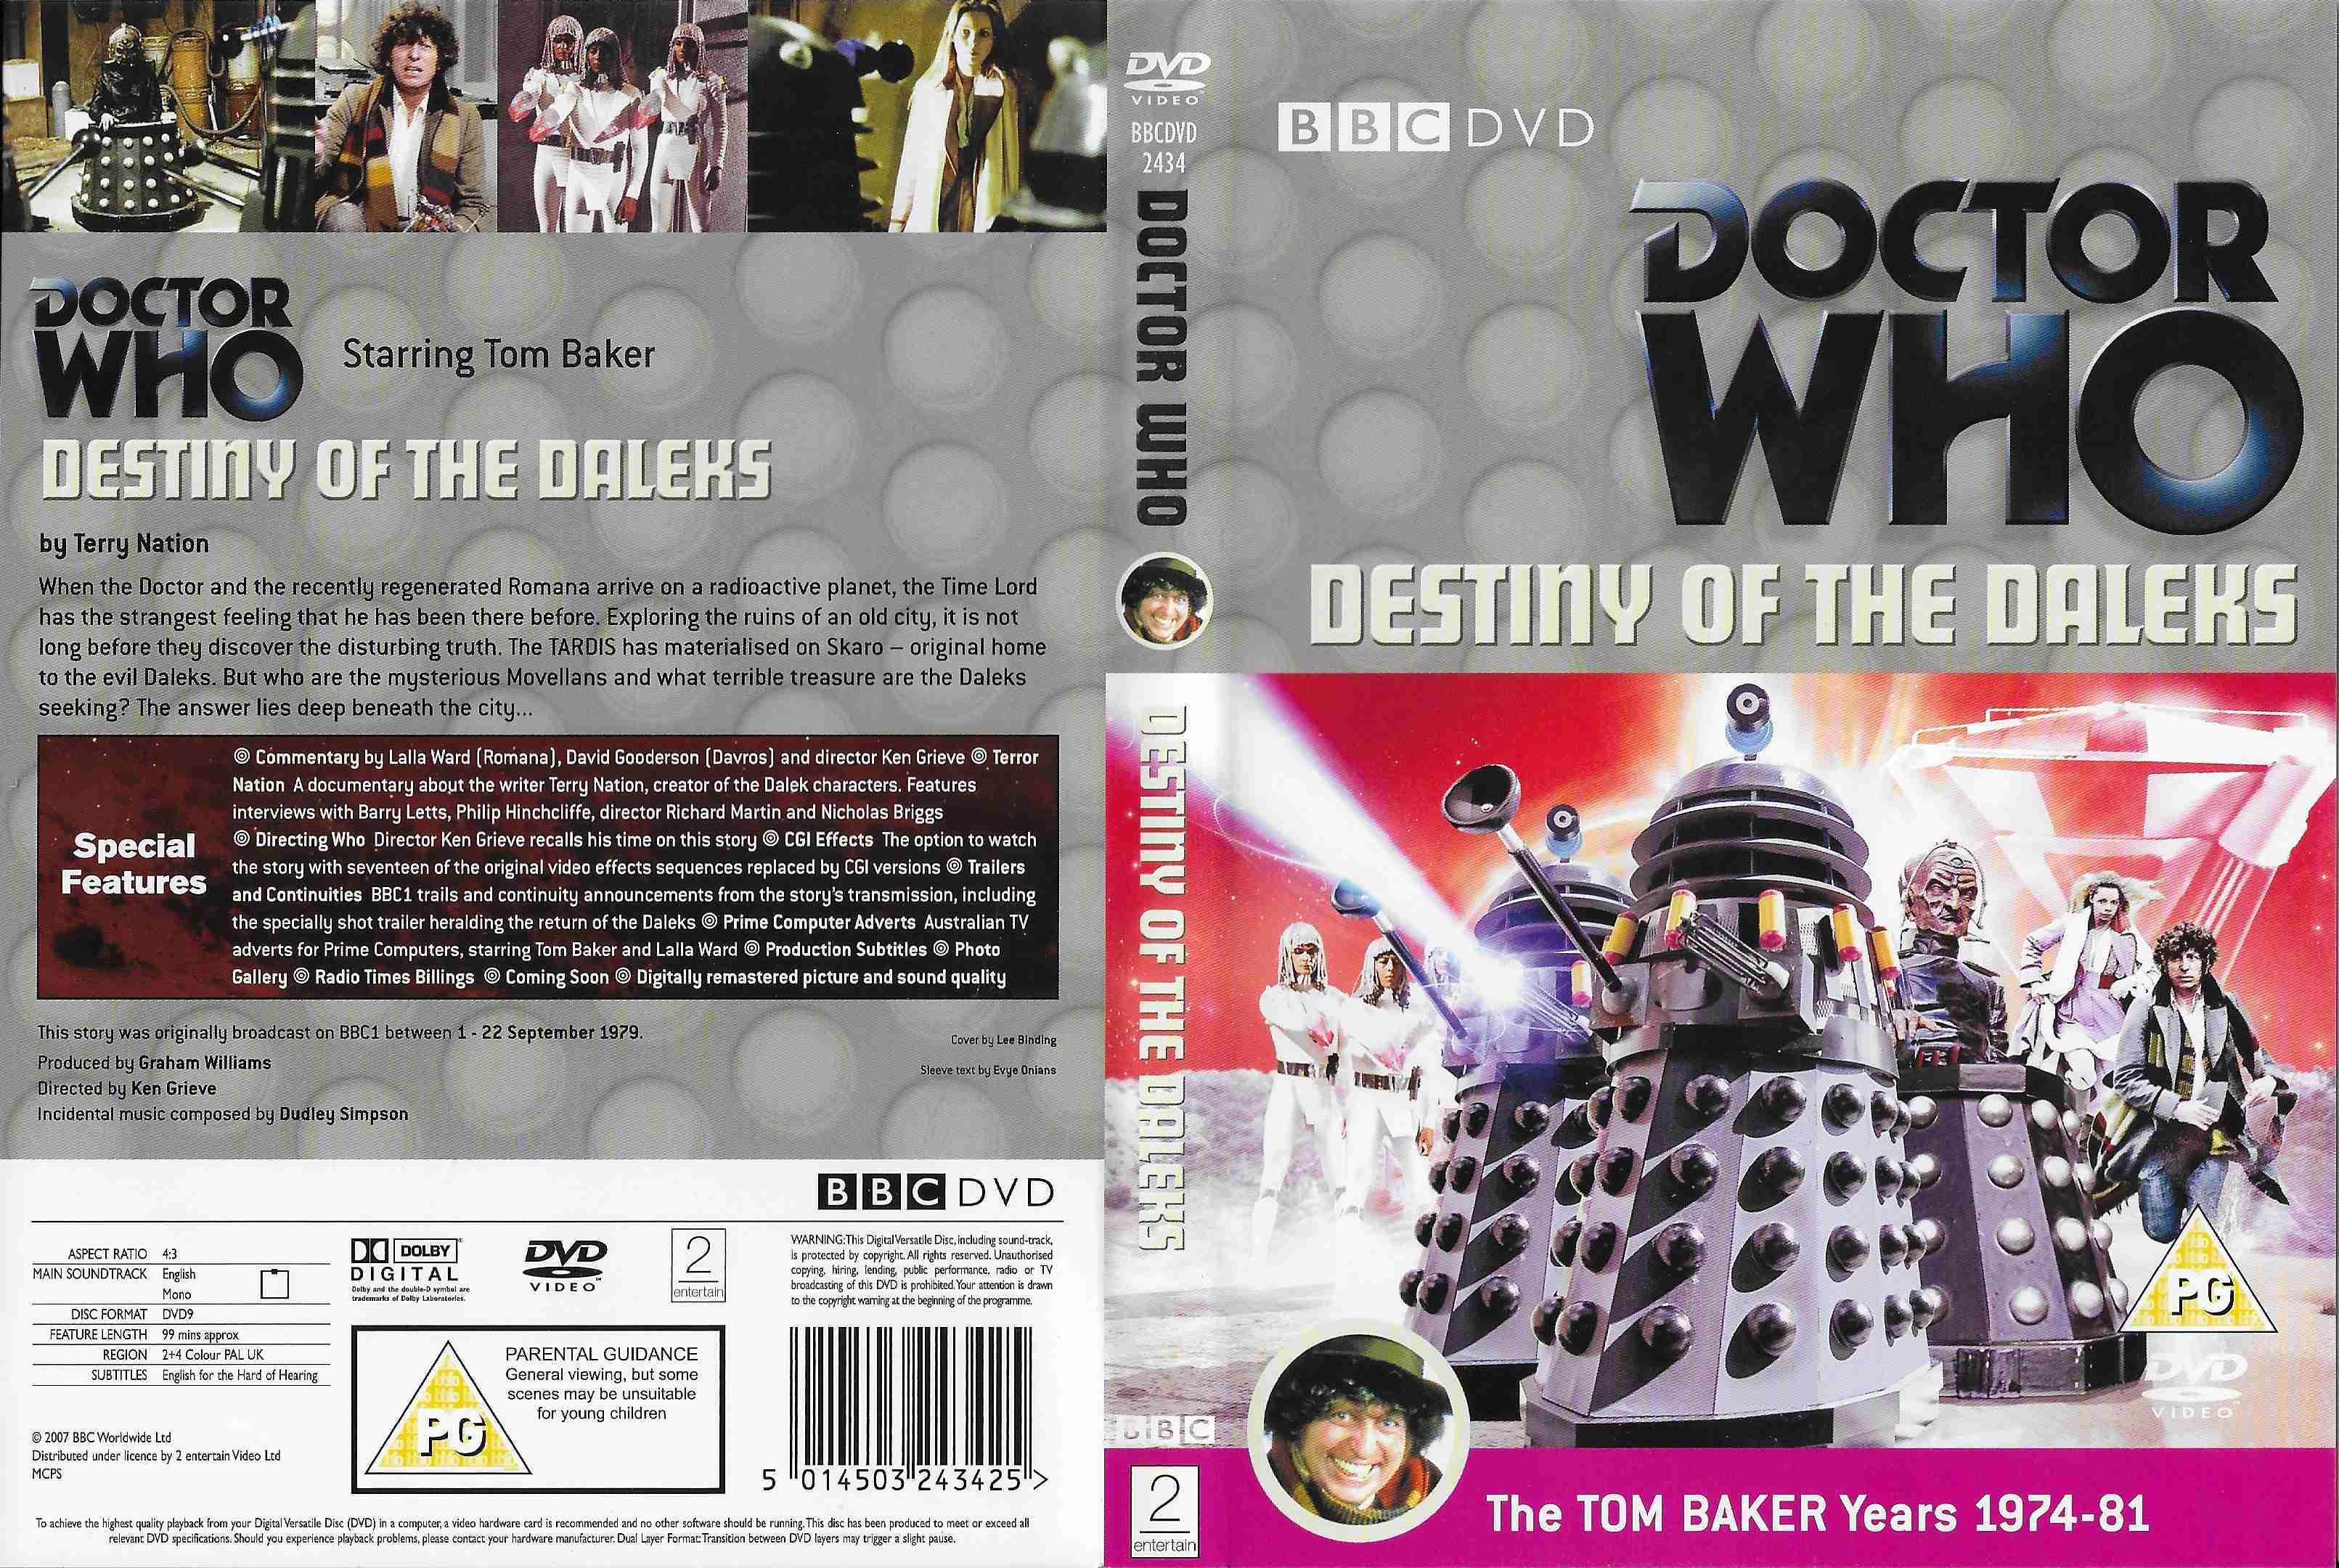 Picture of BBCDVD 2434 Doctor Who - Destiny of the Daleks by artist Terry Nation from the BBC records and Tapes library